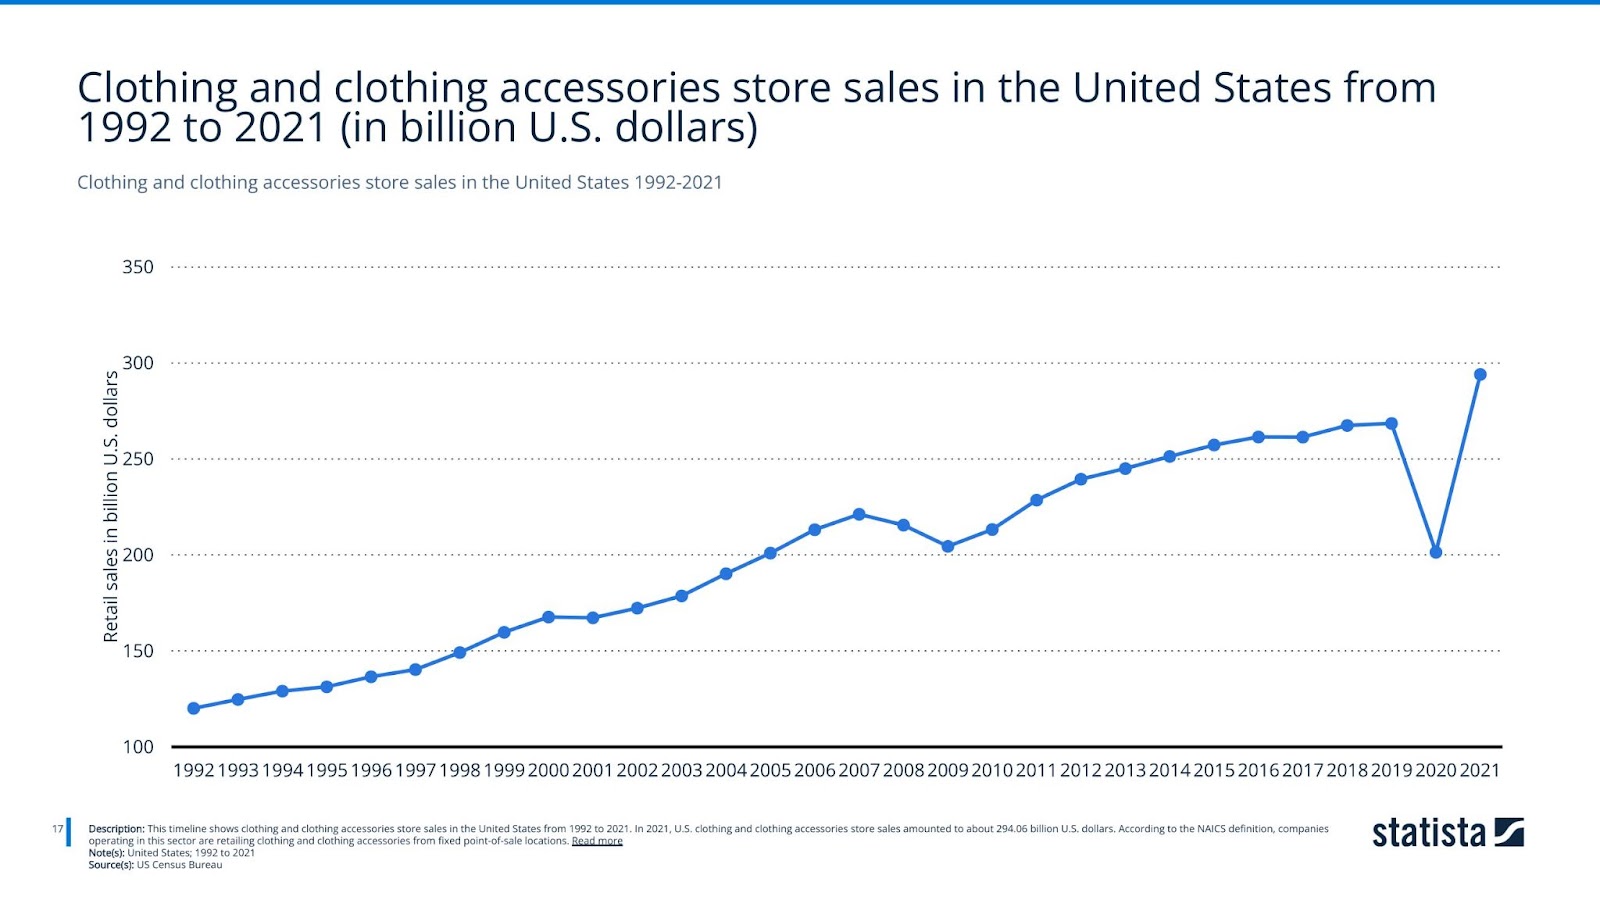 Clothing and clothing accessories store sales in the United States 1992-2021